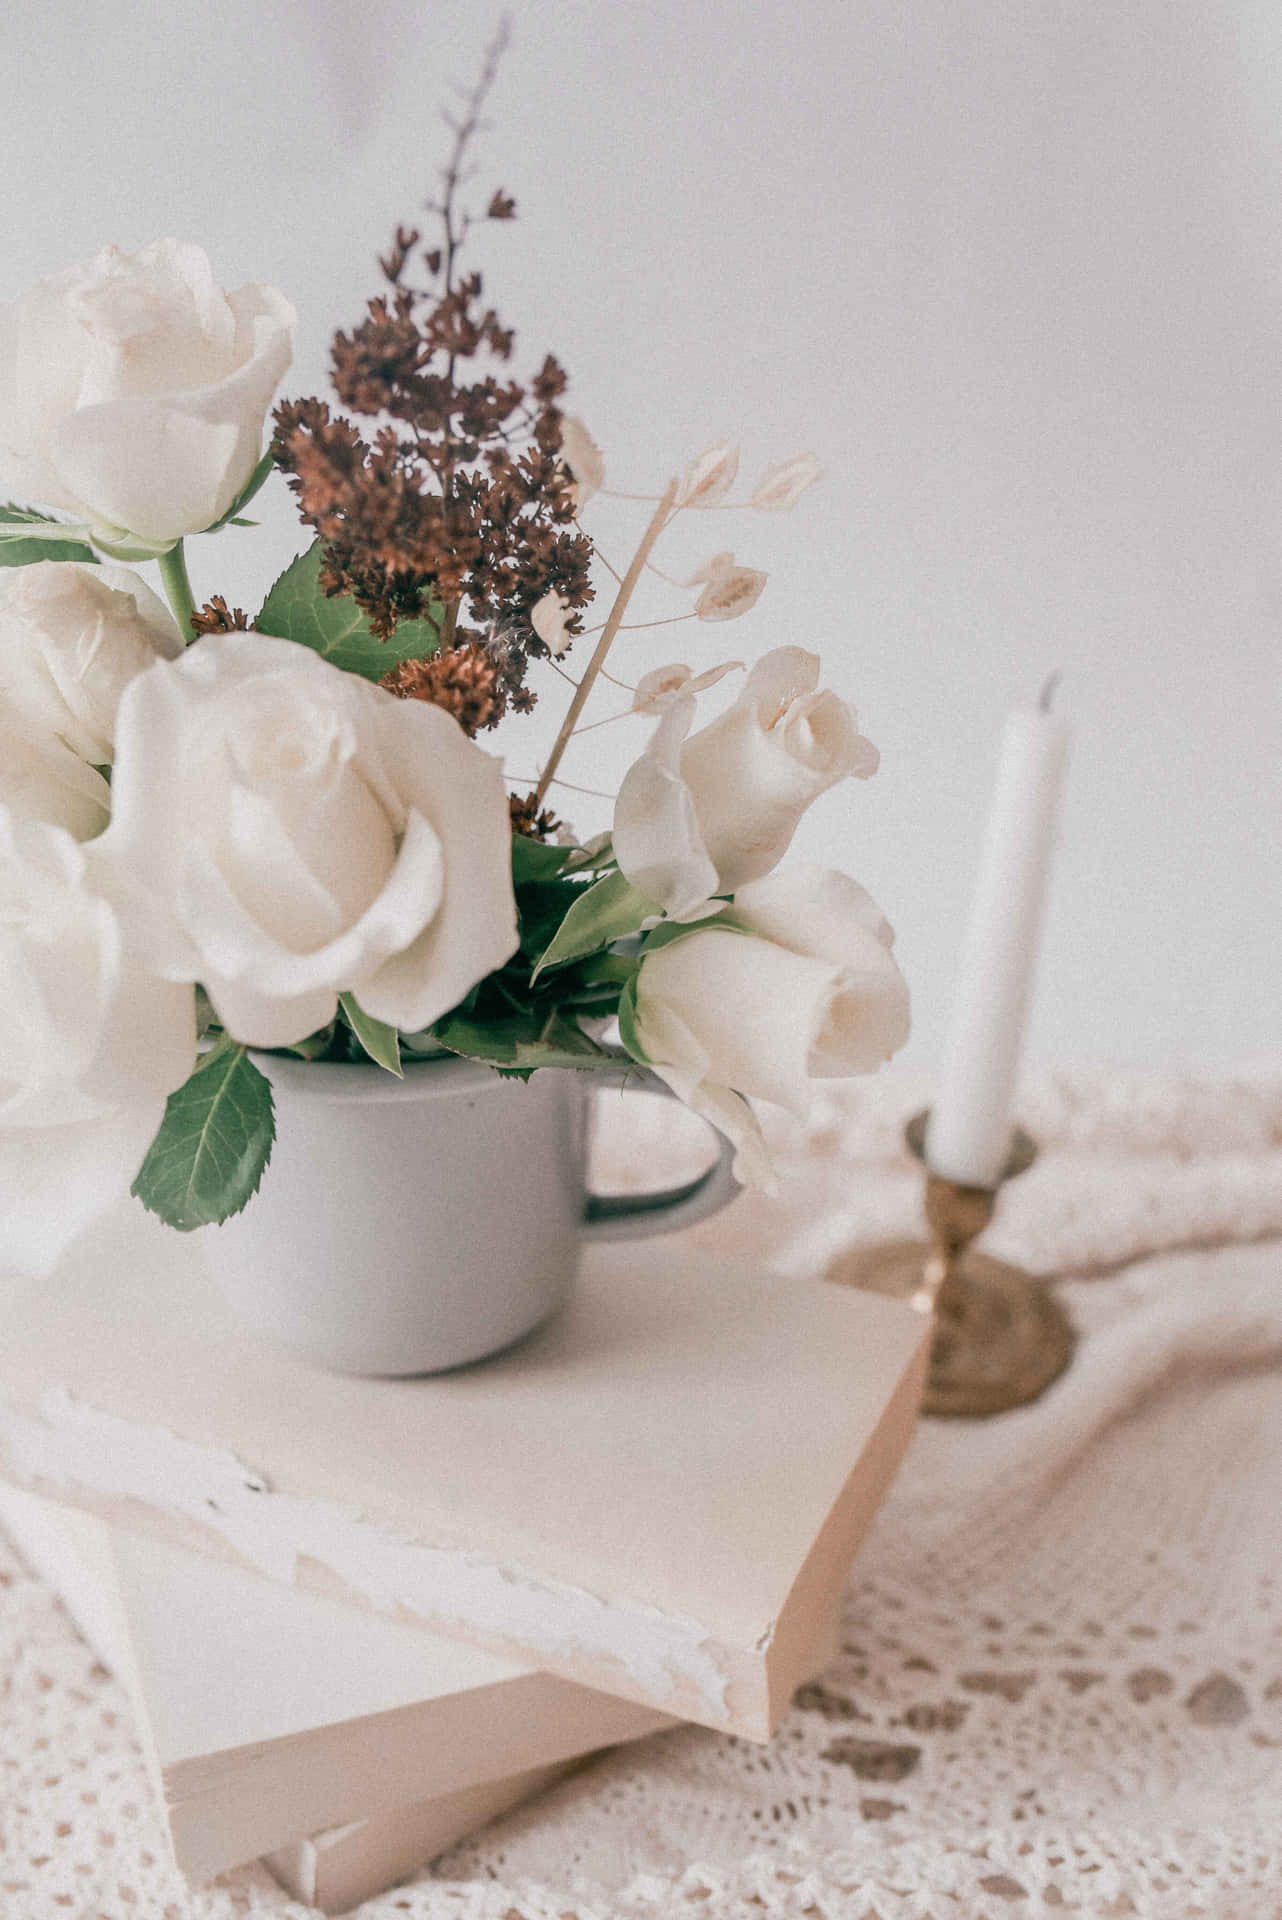 White Roses Candle And Book Background